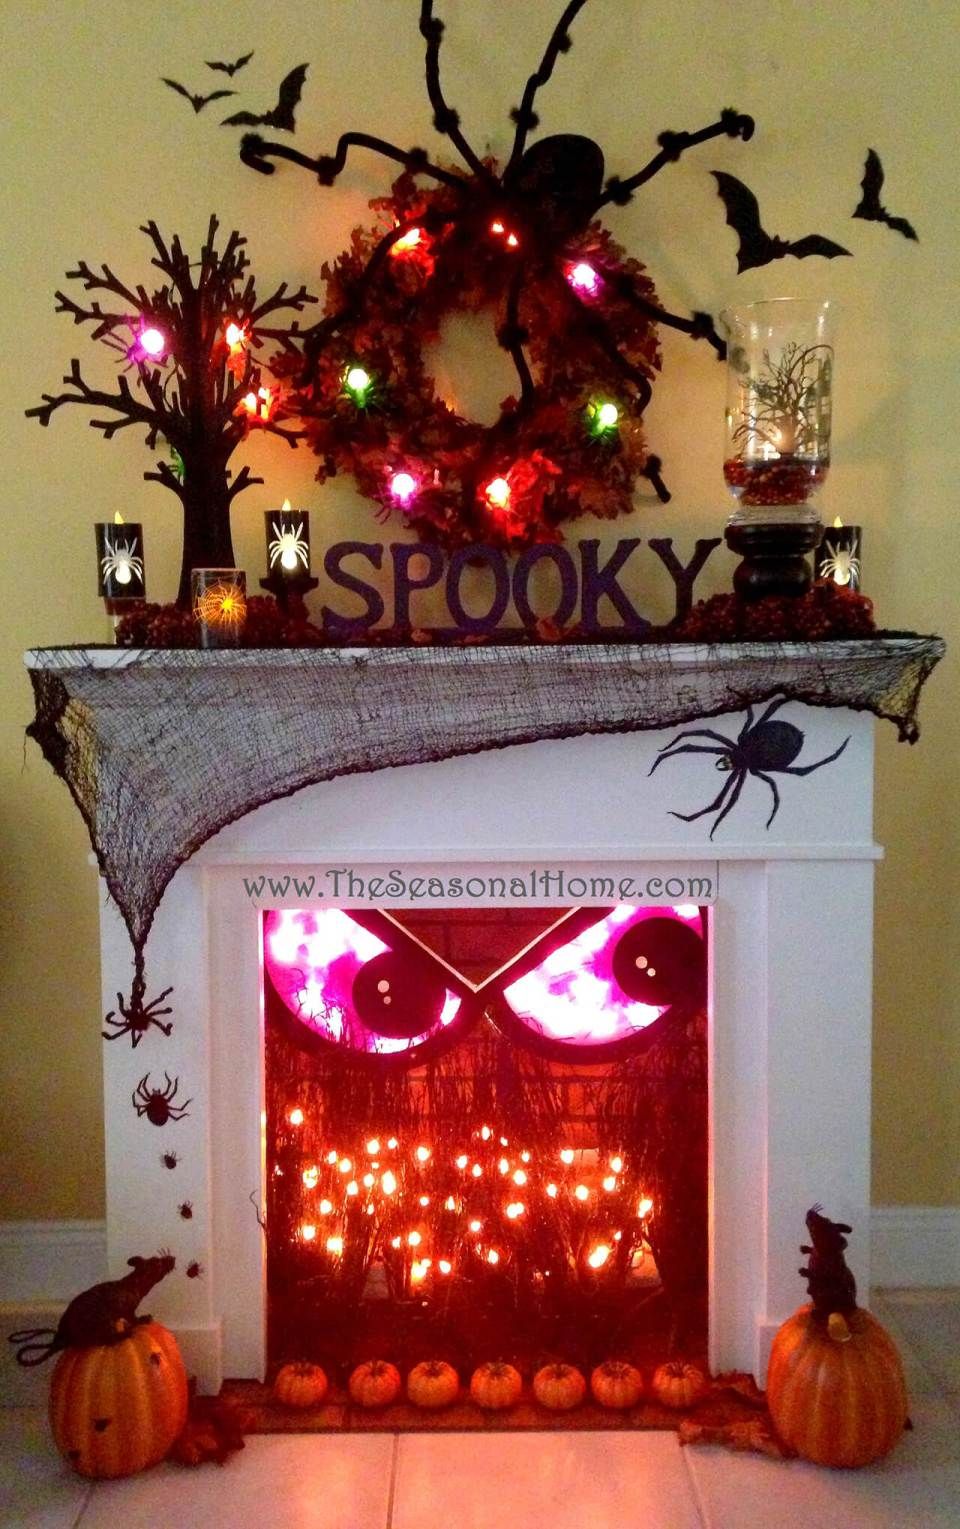 Decorating Inside A Fireplace Luxury 51 Spooky Diy Indoor Halloween Decoration Ideas for 2019